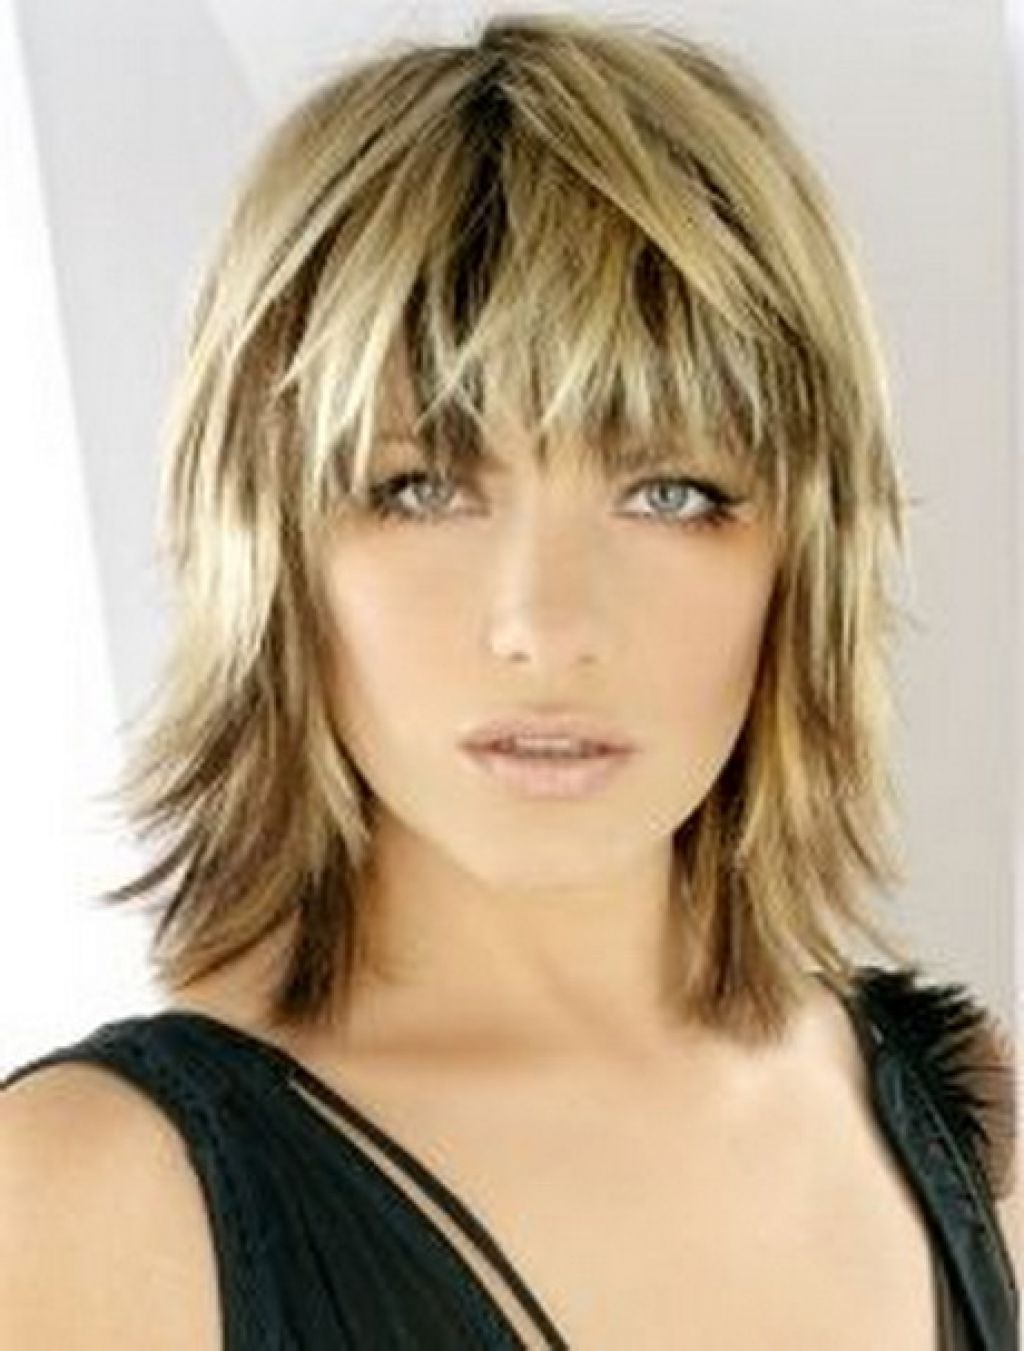 Blonde Medium Length Choppy Shag Haircut With Wispy Bangs And Dark Regarding Most Up To Date Shoulder Grazing Strawberry Shag Blonde Hairstyles (View 1 of 20)